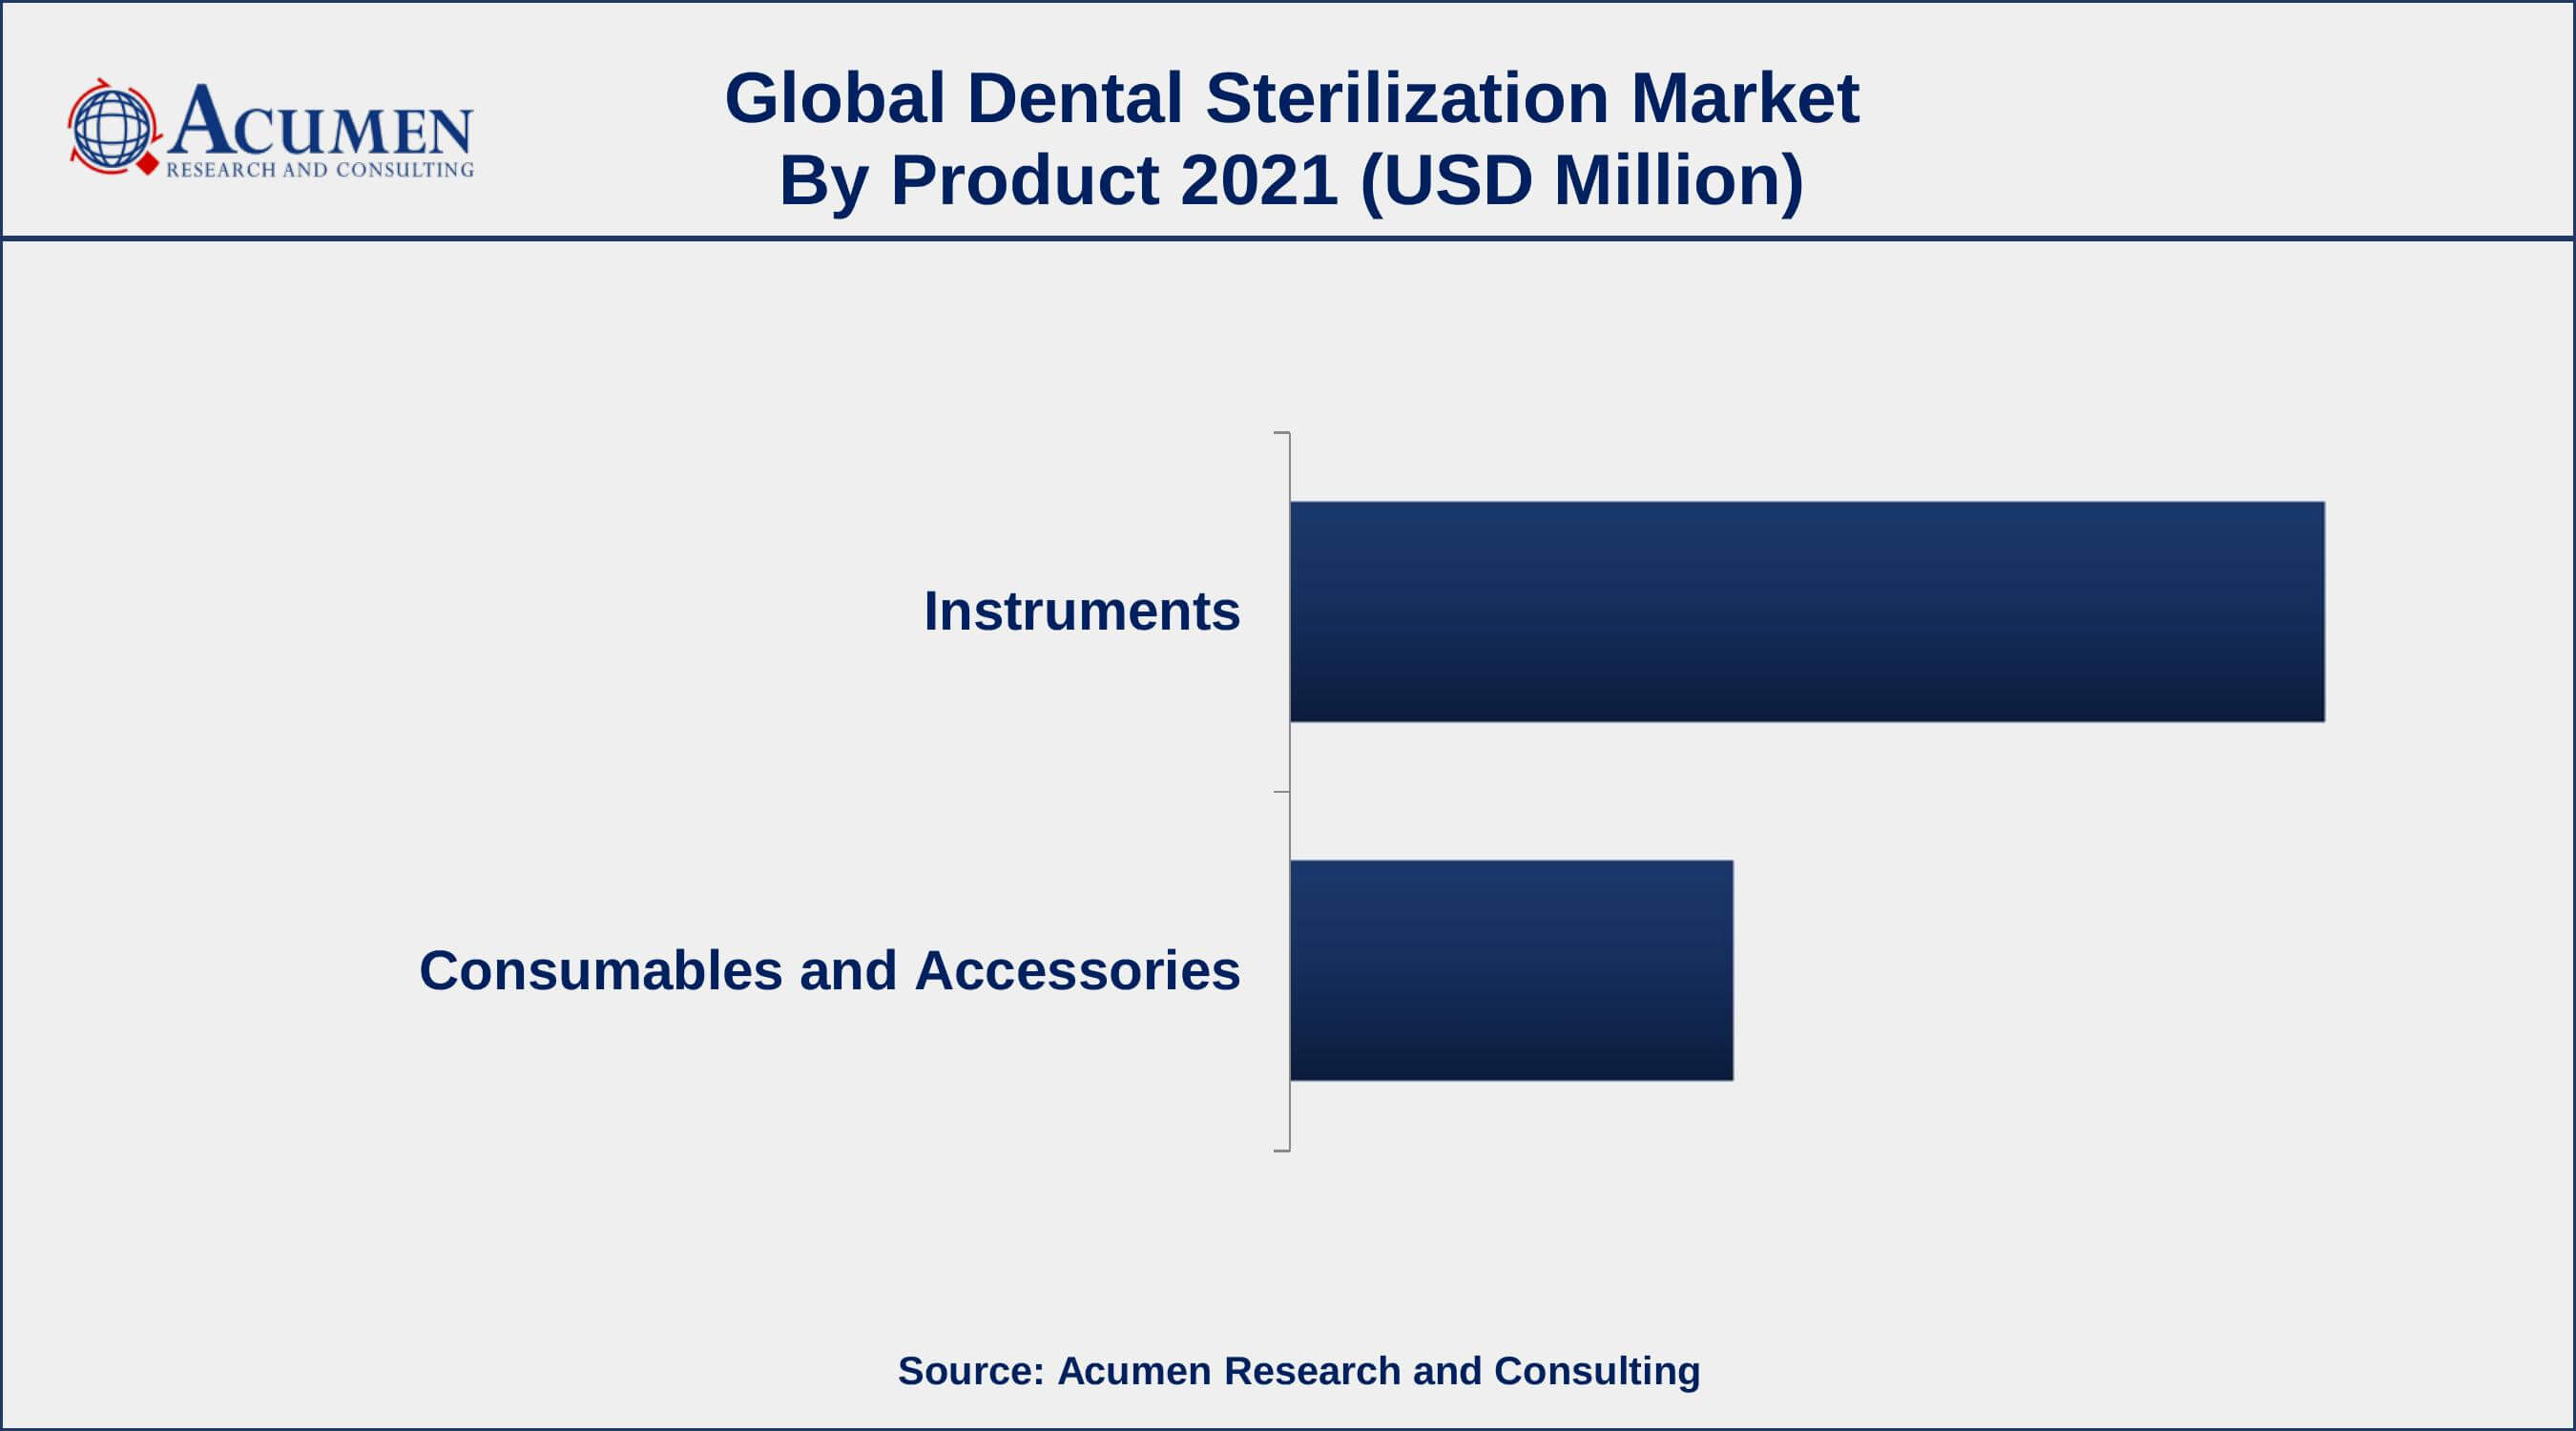 Based on product, instrument segment accounted for over 70% of the overall market share in 2021